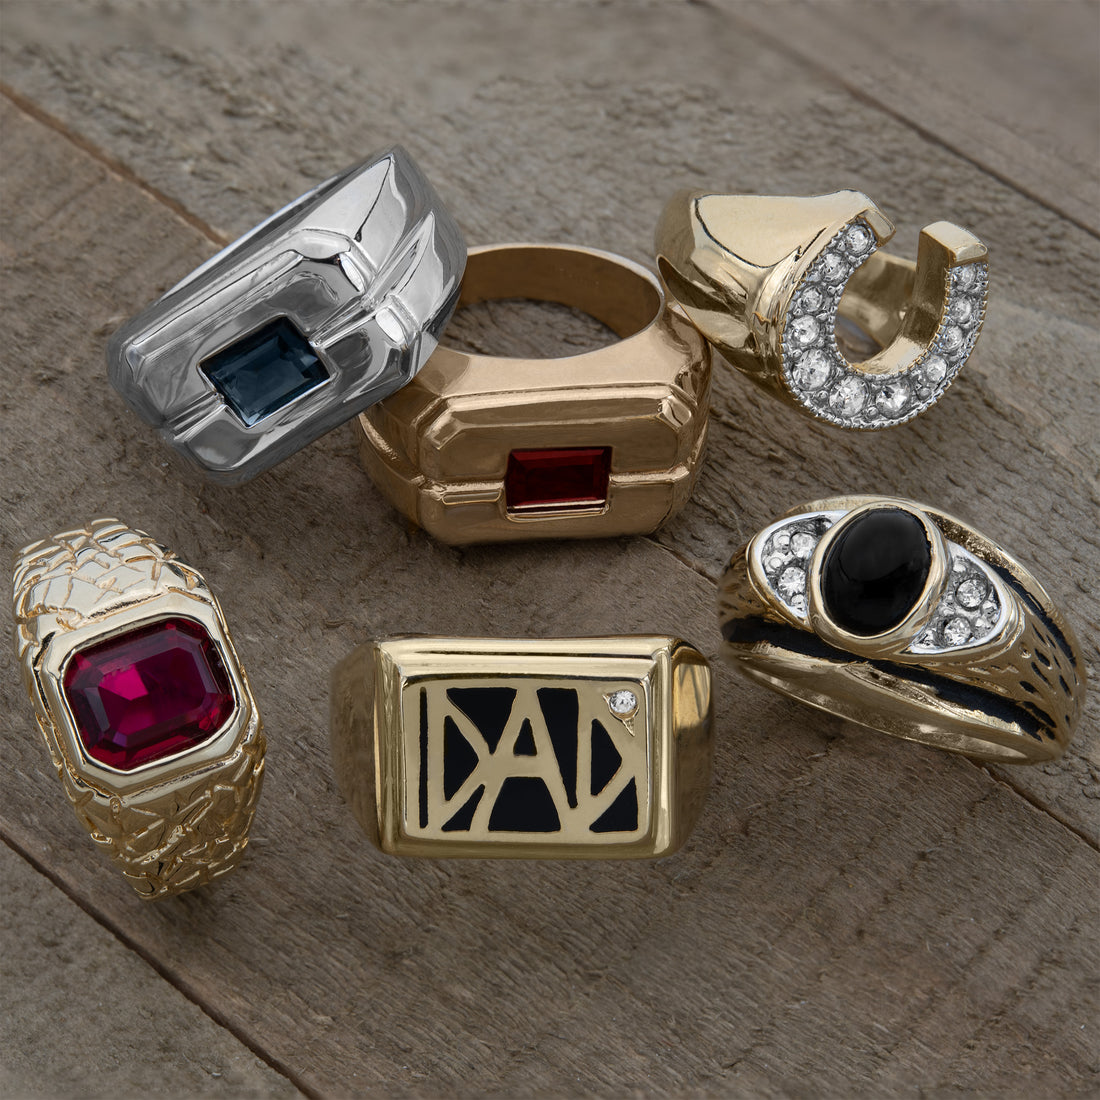 Men's Vintage Rings: Gifts for Father's Day